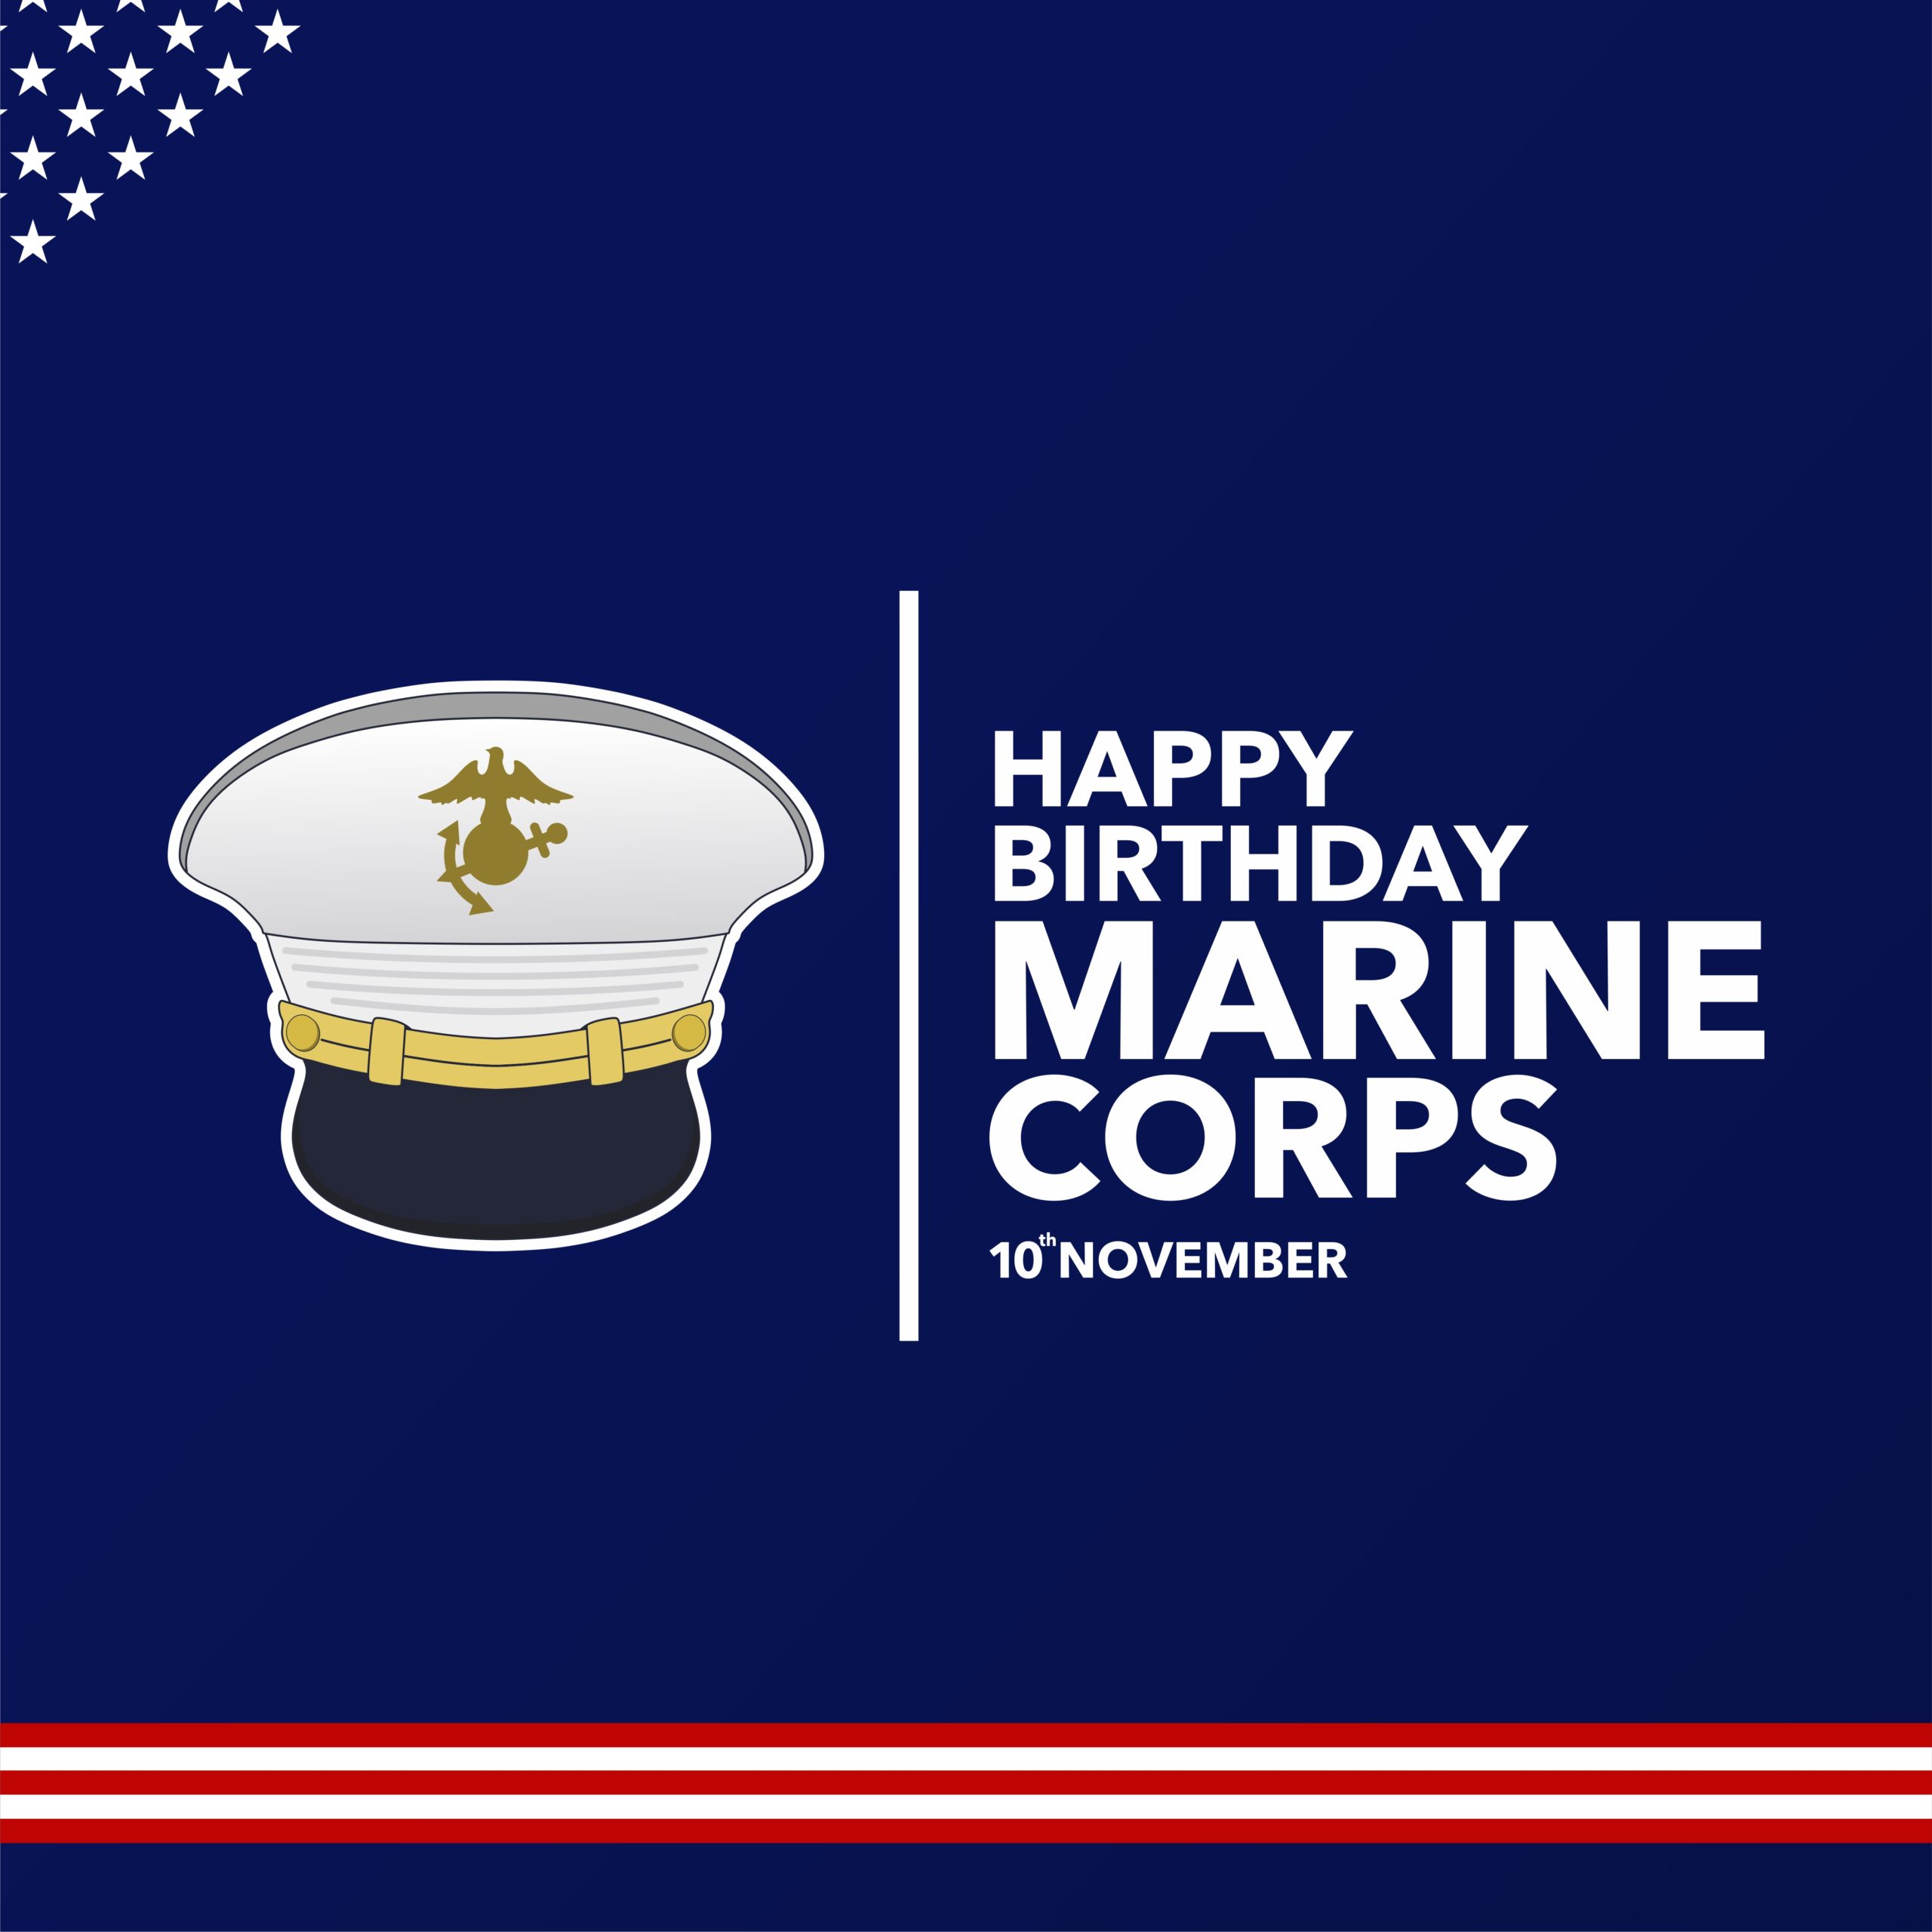 Happy Birthday US Marine Corps: Funny Memes, Messages, Sayings, Quotes, Wishes, Images, Greetings, Gifs, and Slogans